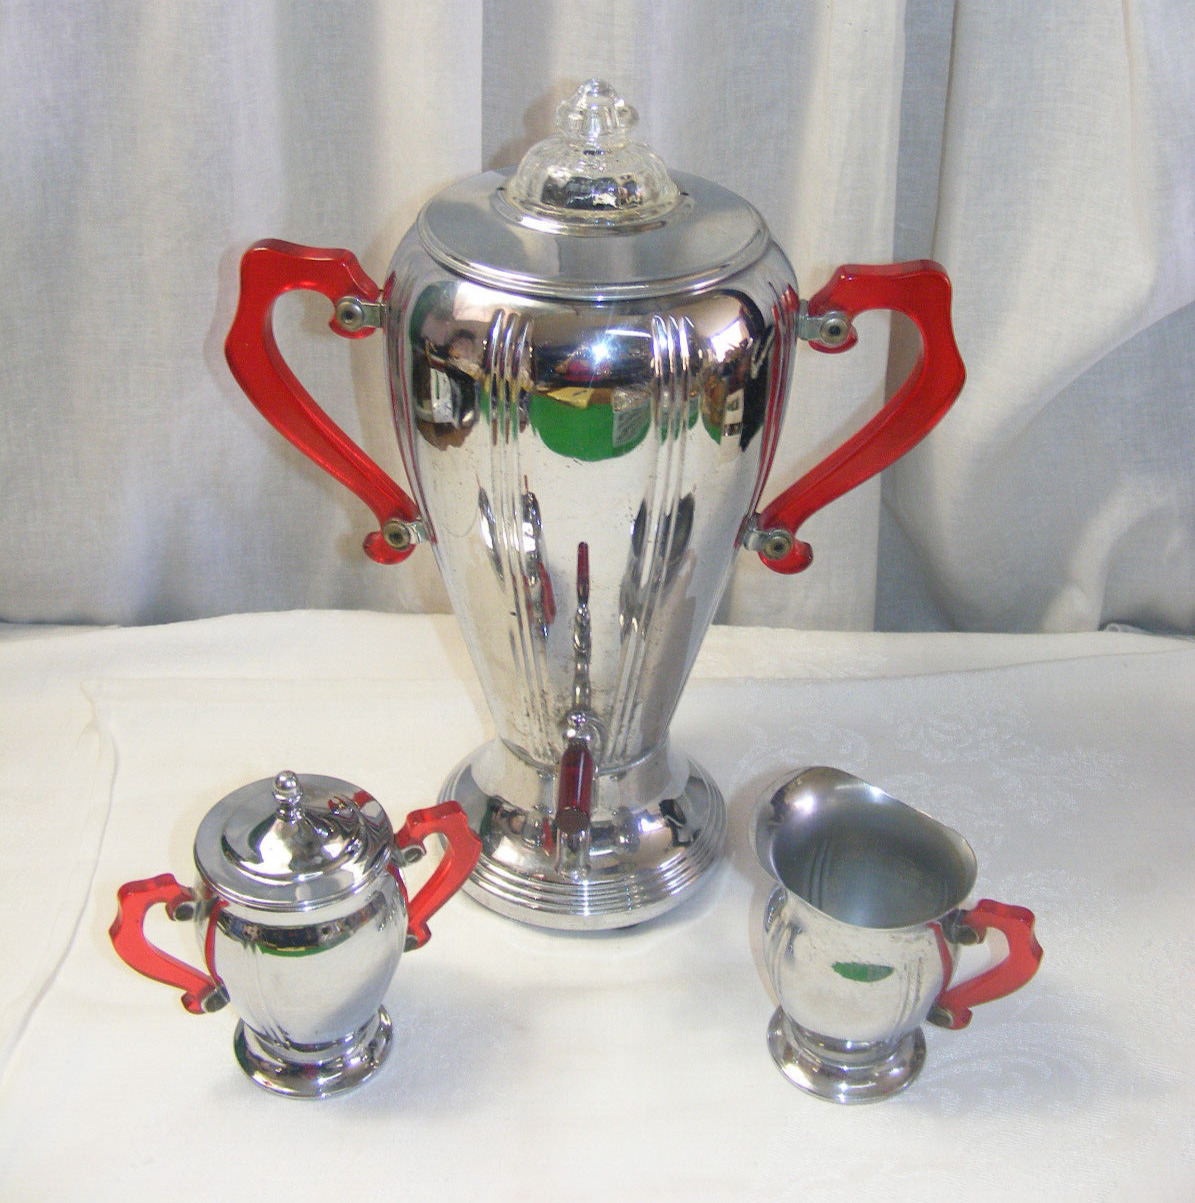 Vintage Labelle Coffee Stainless Peculator w Creamer Sugar Bowl Red Handles